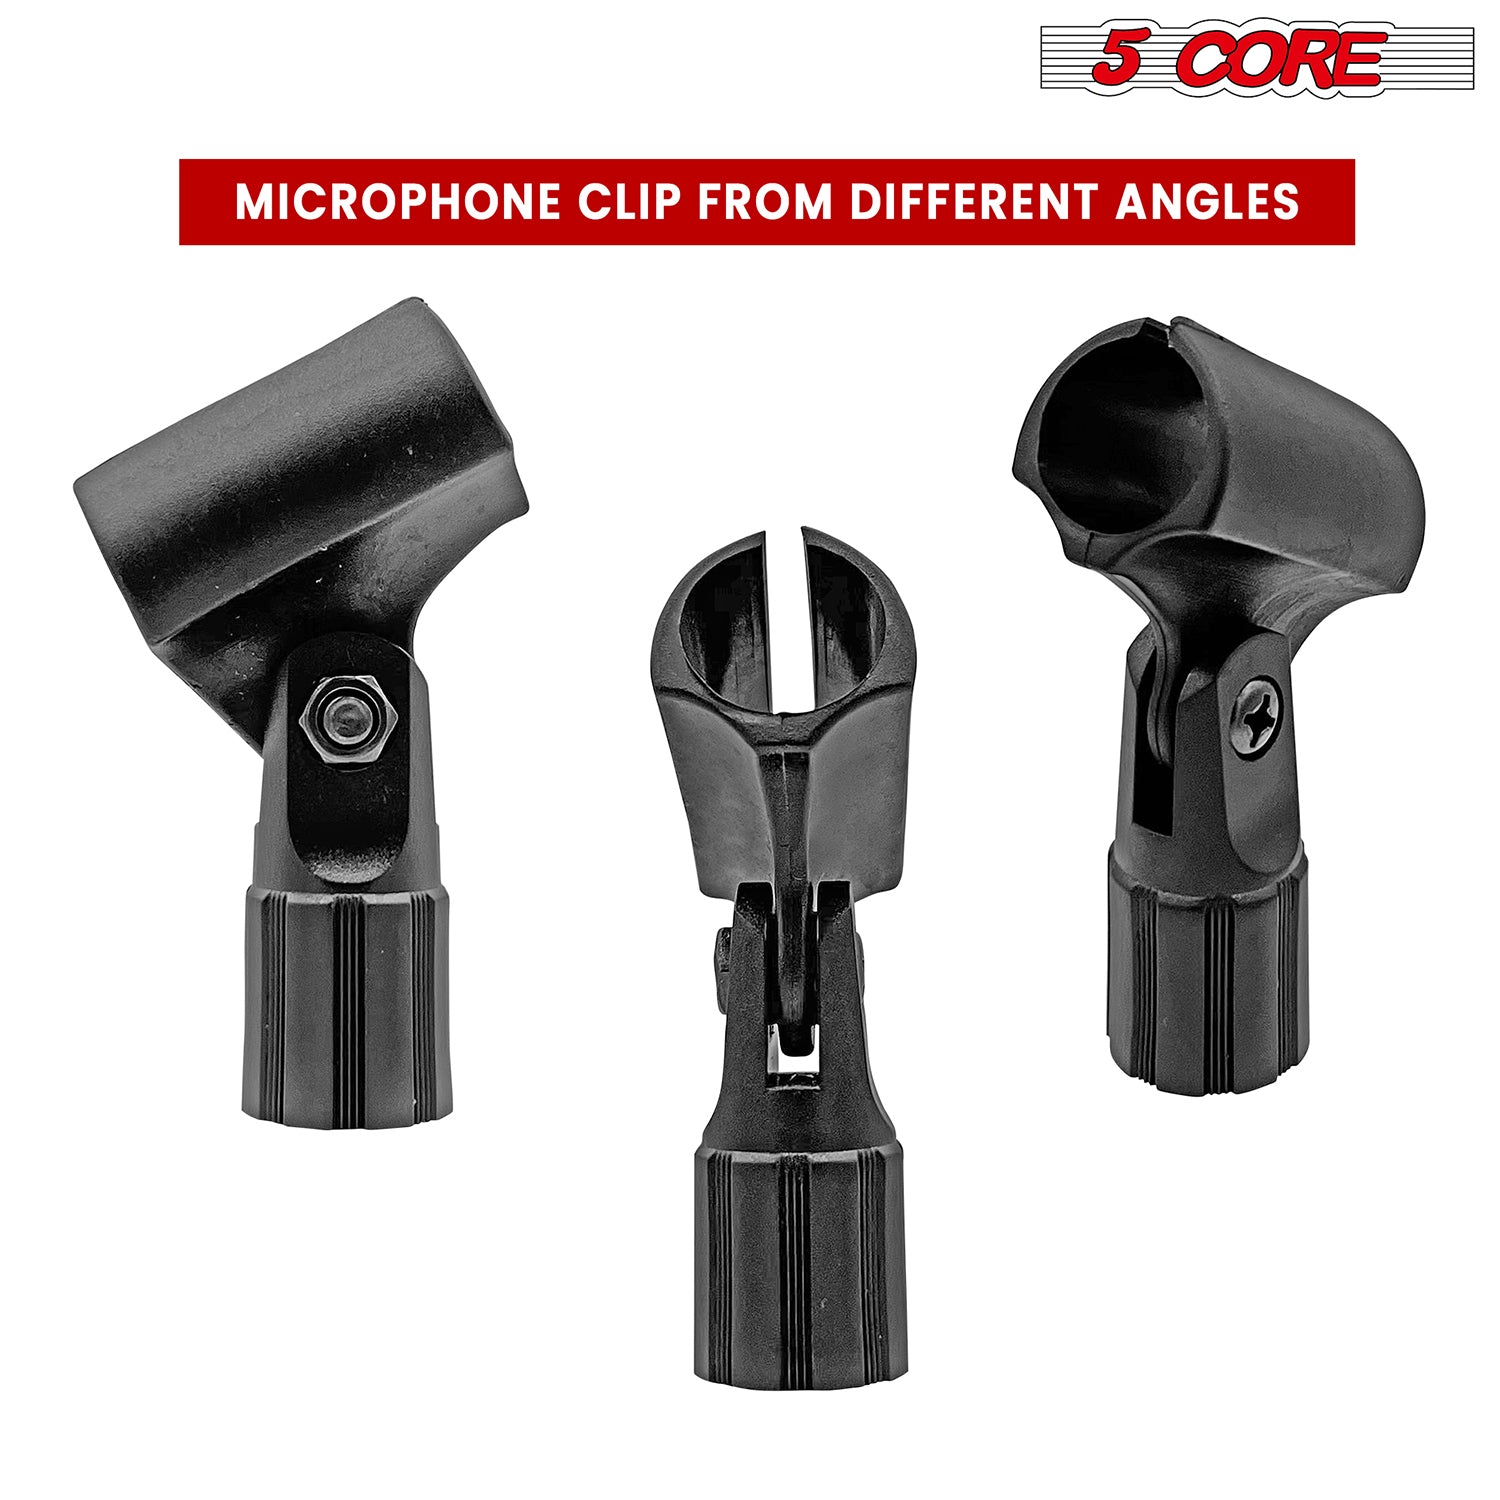 5 Core Microphone Clip Holder 4 Pieces with Screw Adapters 5/8 to 3/8 Inch